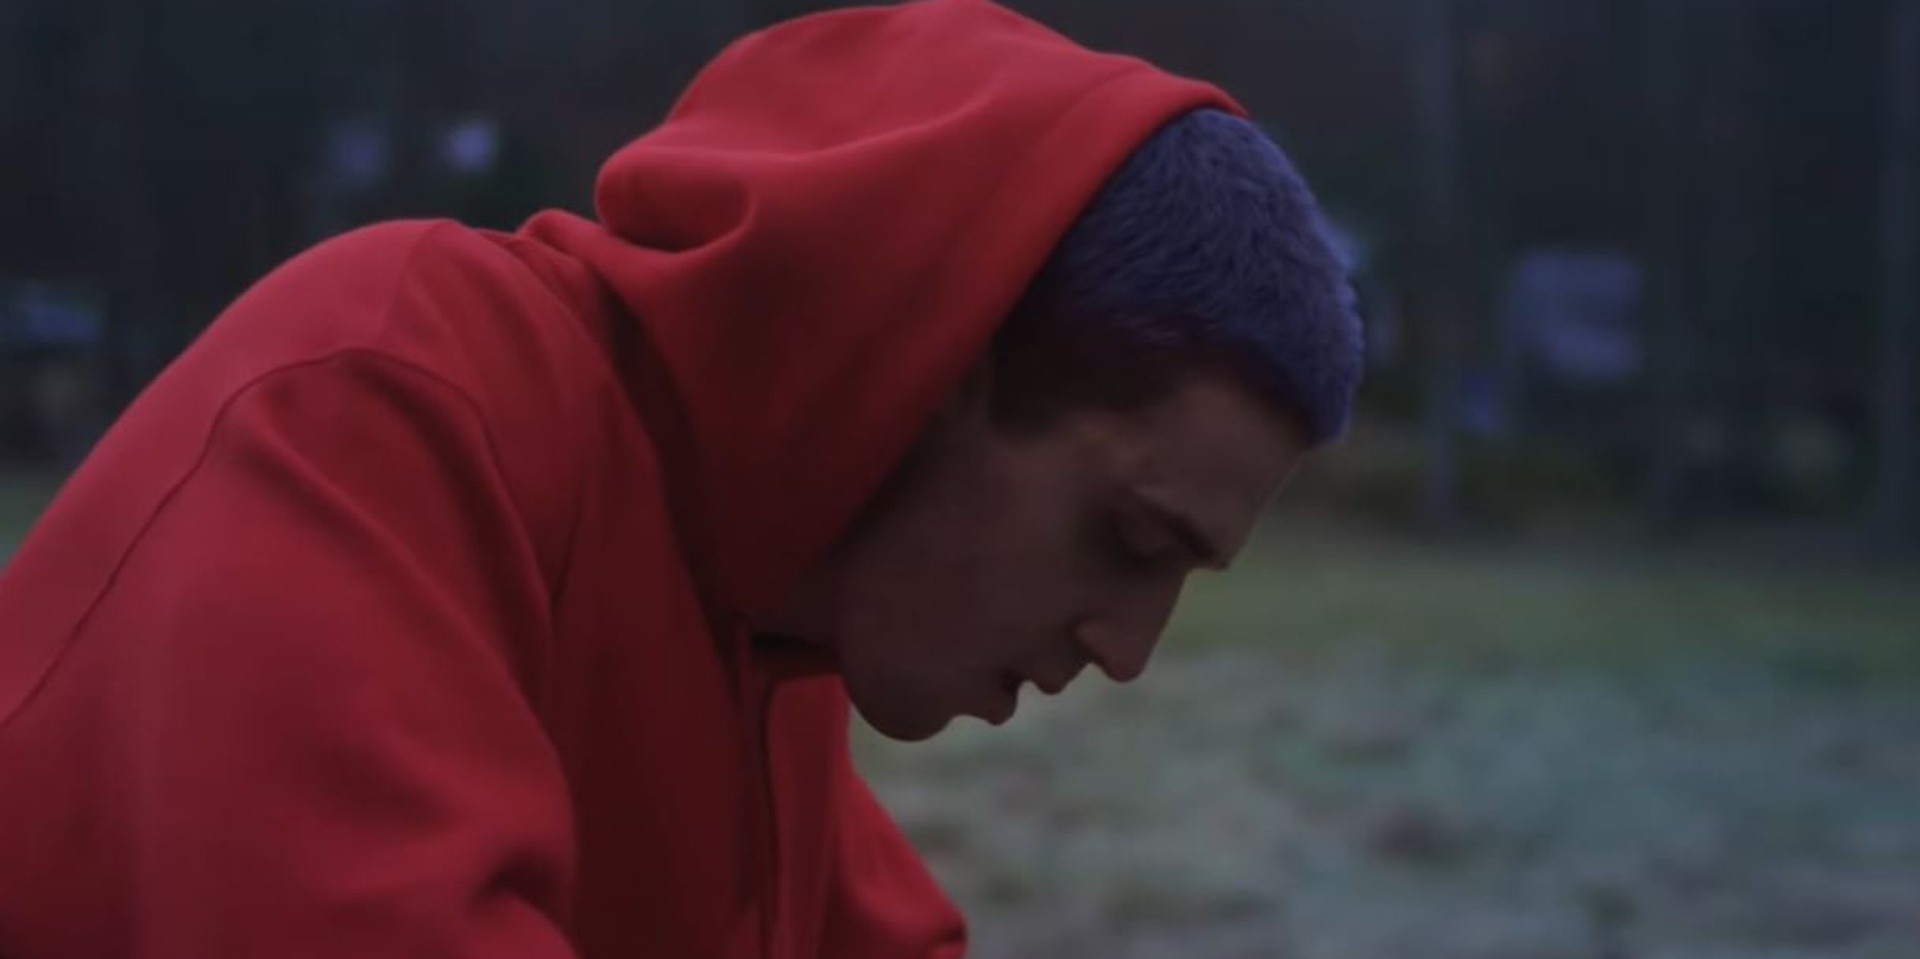 Lauv releases 'Changes' music video from upcoming album ~how i'm feeling~ – watch